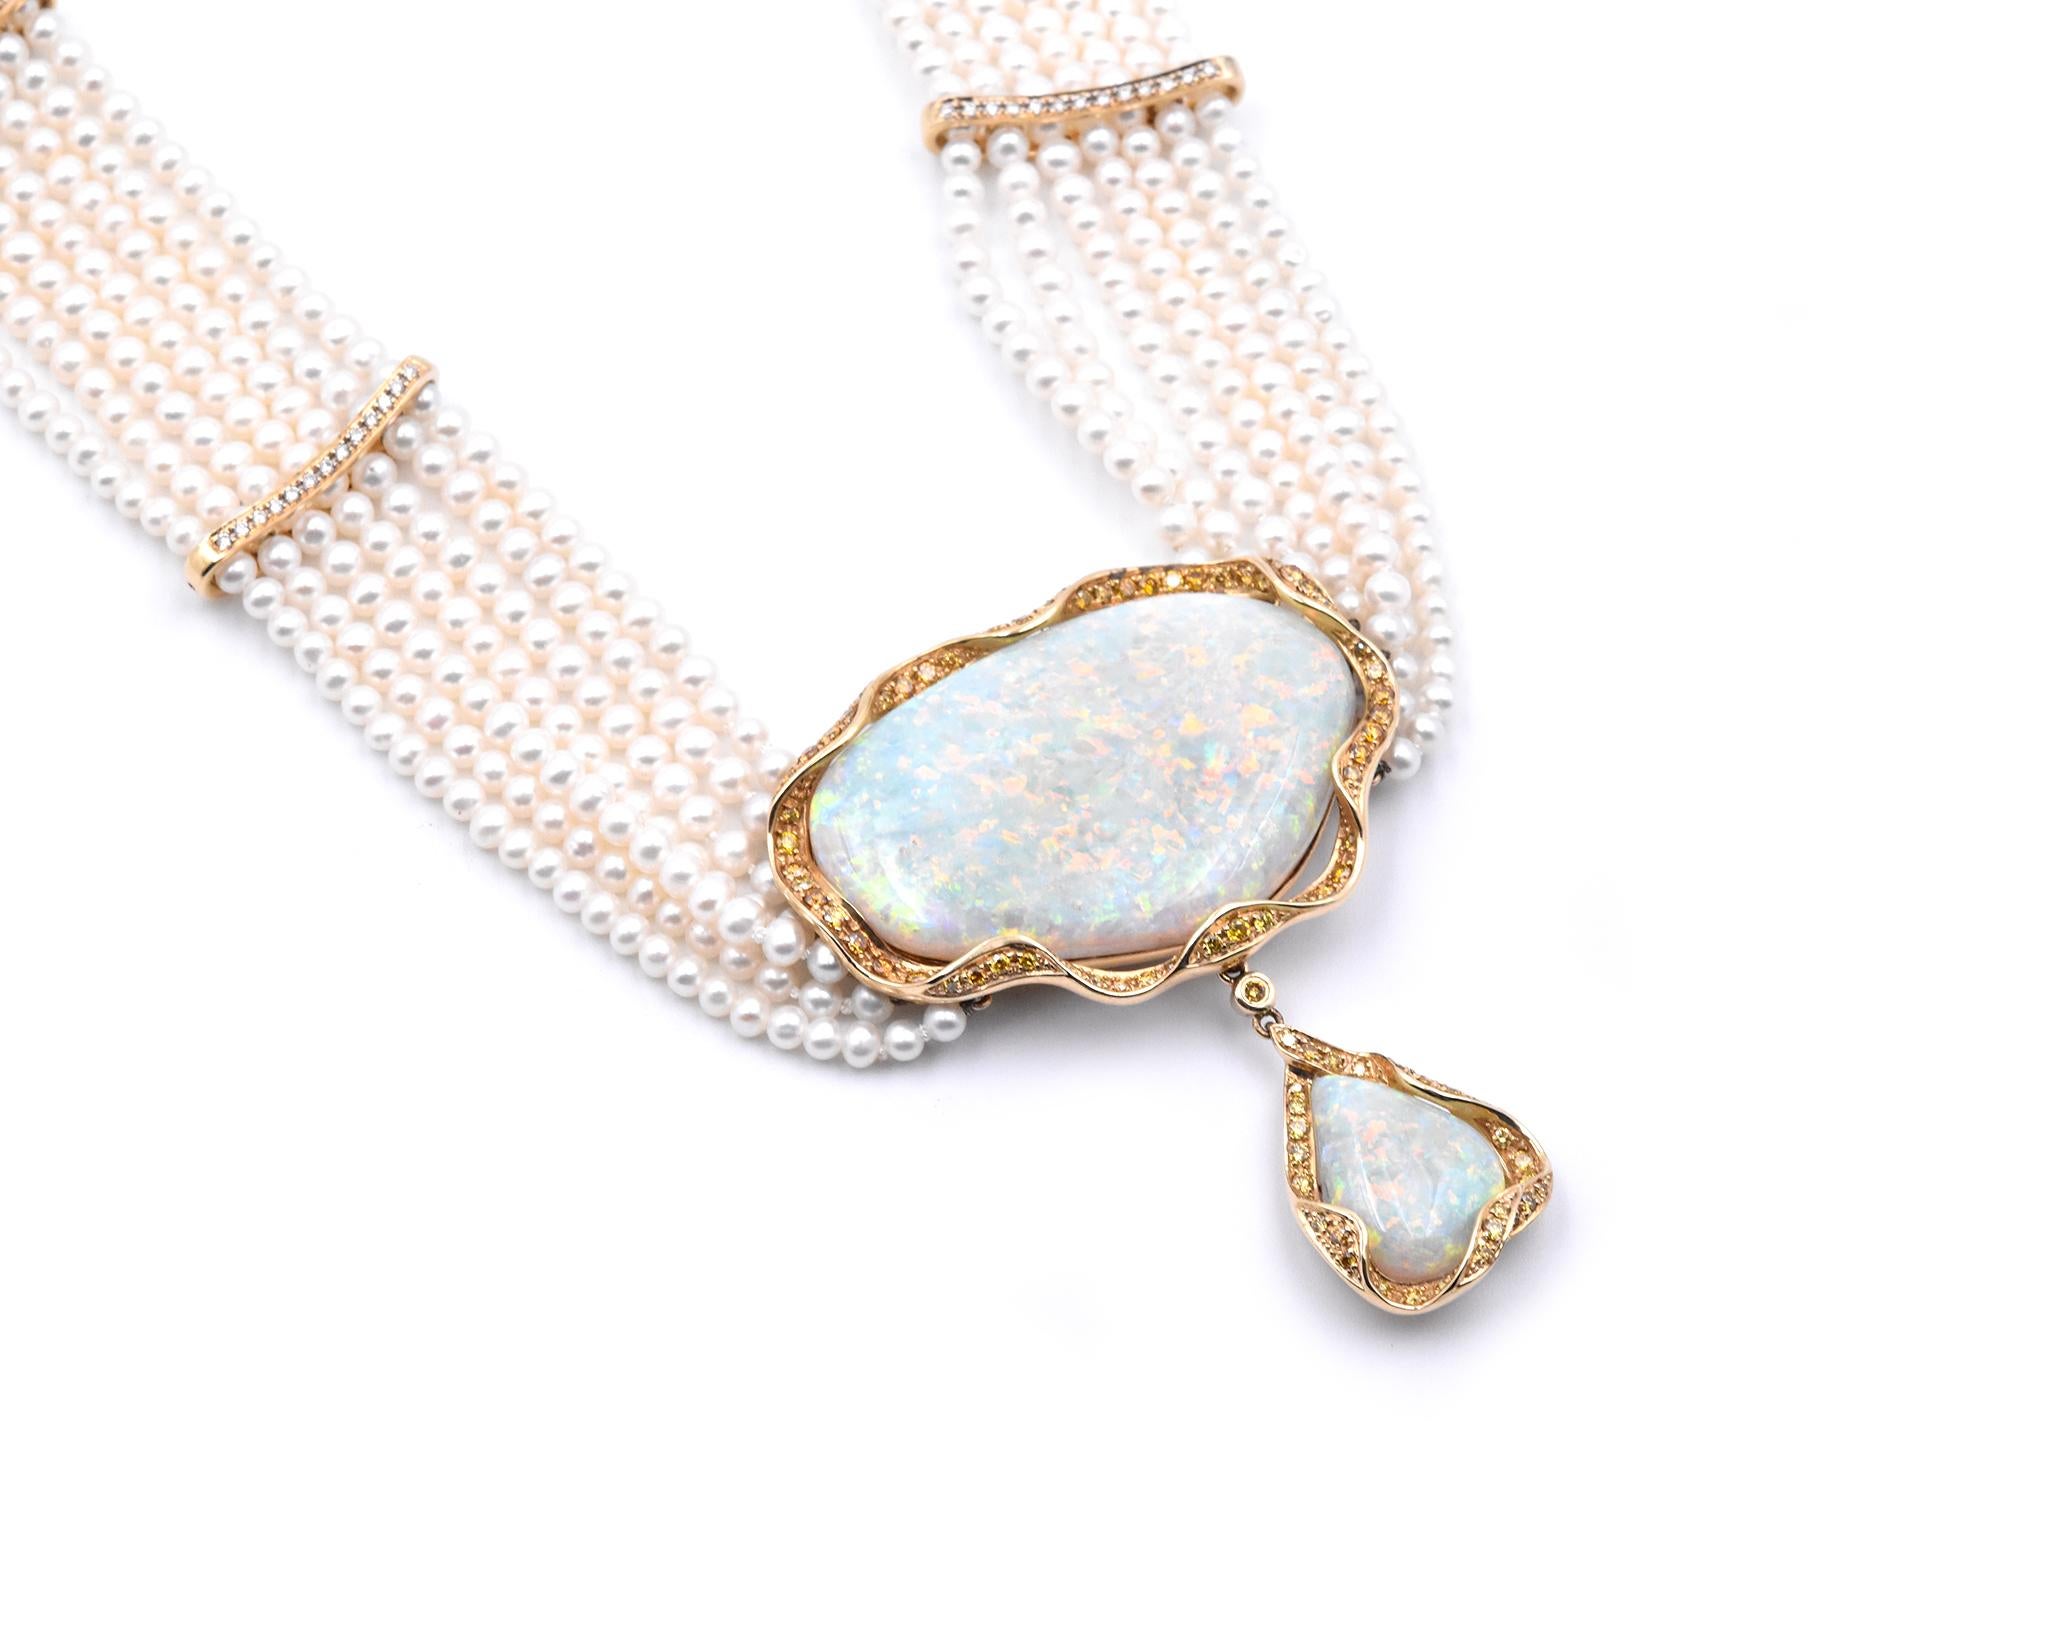 Designer: The Estate Watch & Jewelry Company
Material: 18k yellow gold
Gemstone: 2 opals 
White Diamonds: 78 round brilliant cuts = 0.50cttw
Yellow Diamonds: 93 round yellow diamonds
Dimensions: pearl necklace measures 32 inches in length
Weight: